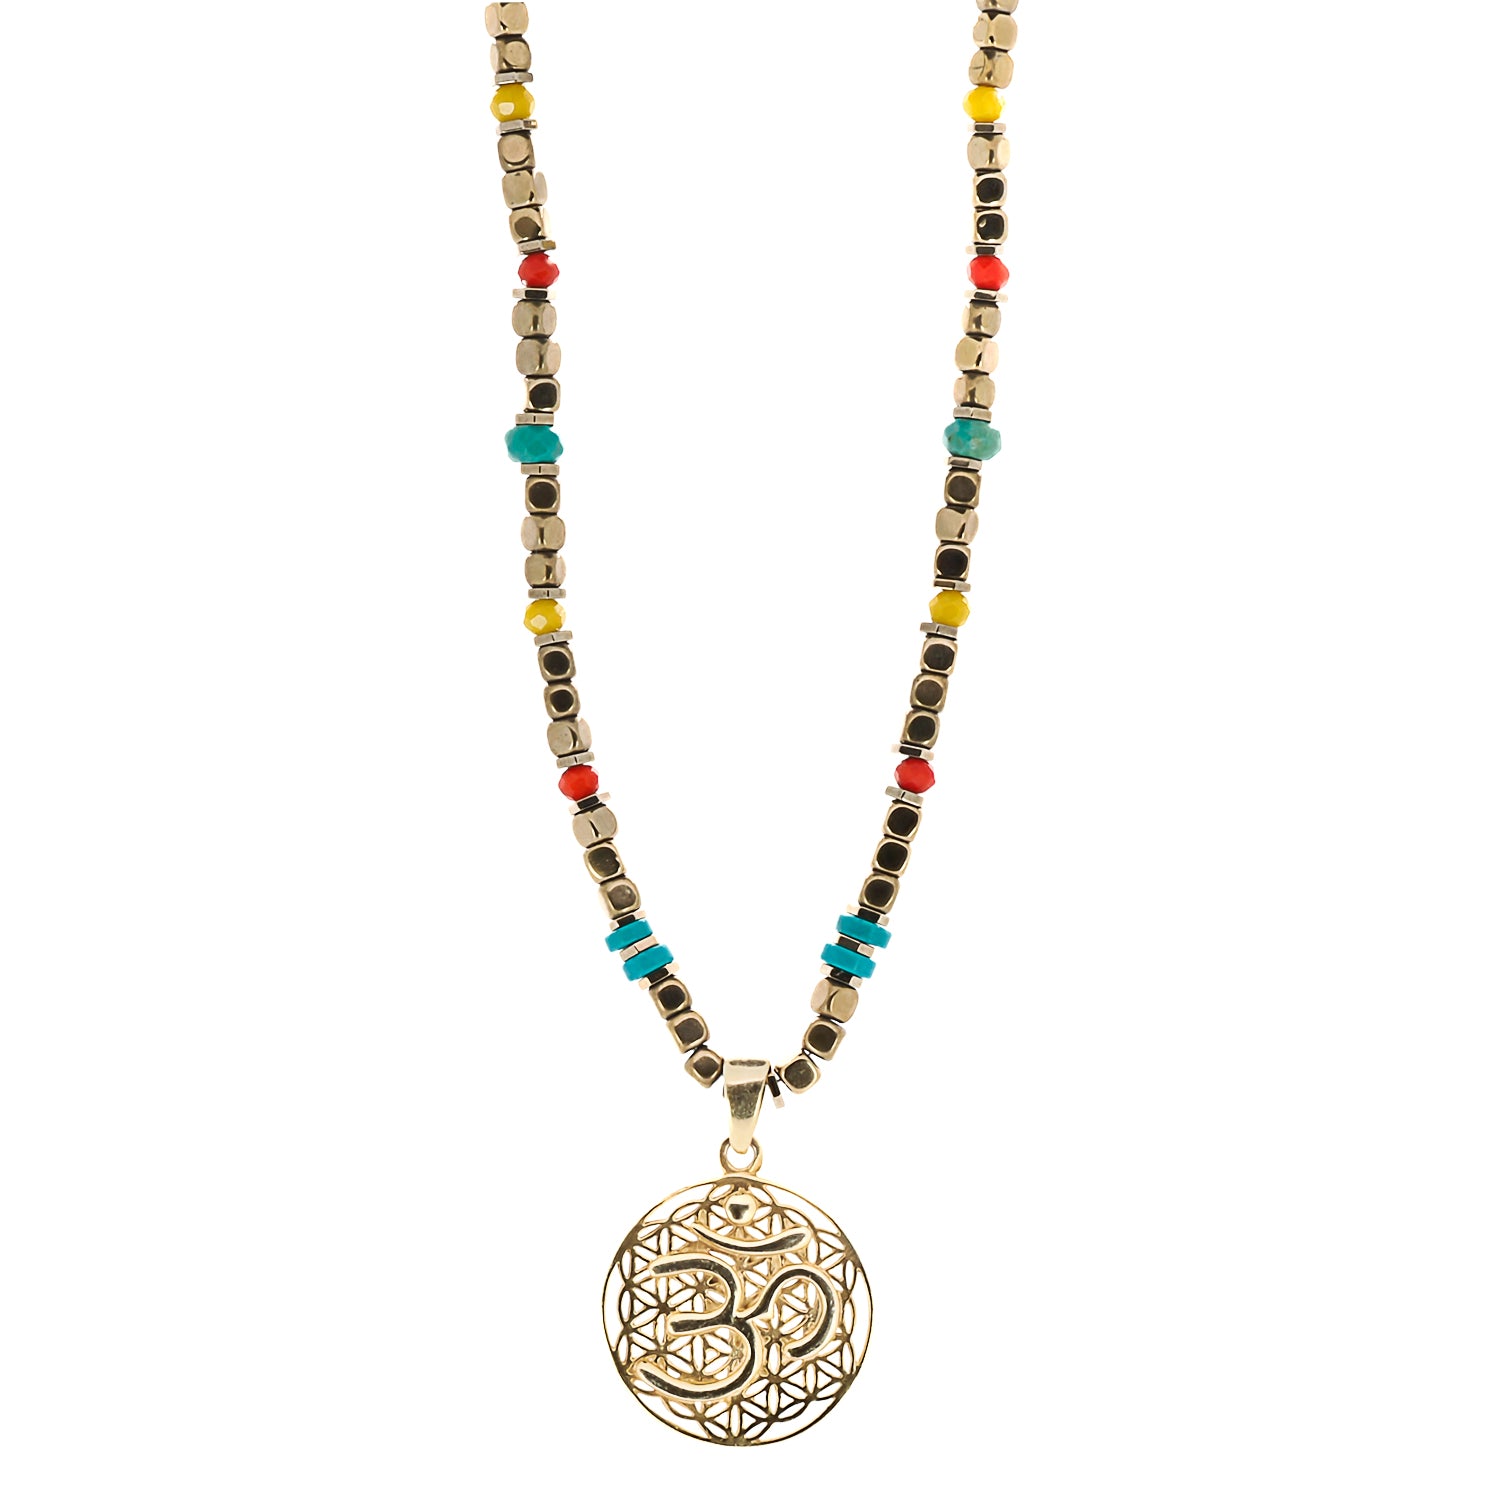 Breathe Om Gold Necklace featuring an 18K gold-plated Om pendant and turquoise stone beads, exuding a sense of tranquility and spiritual connection.